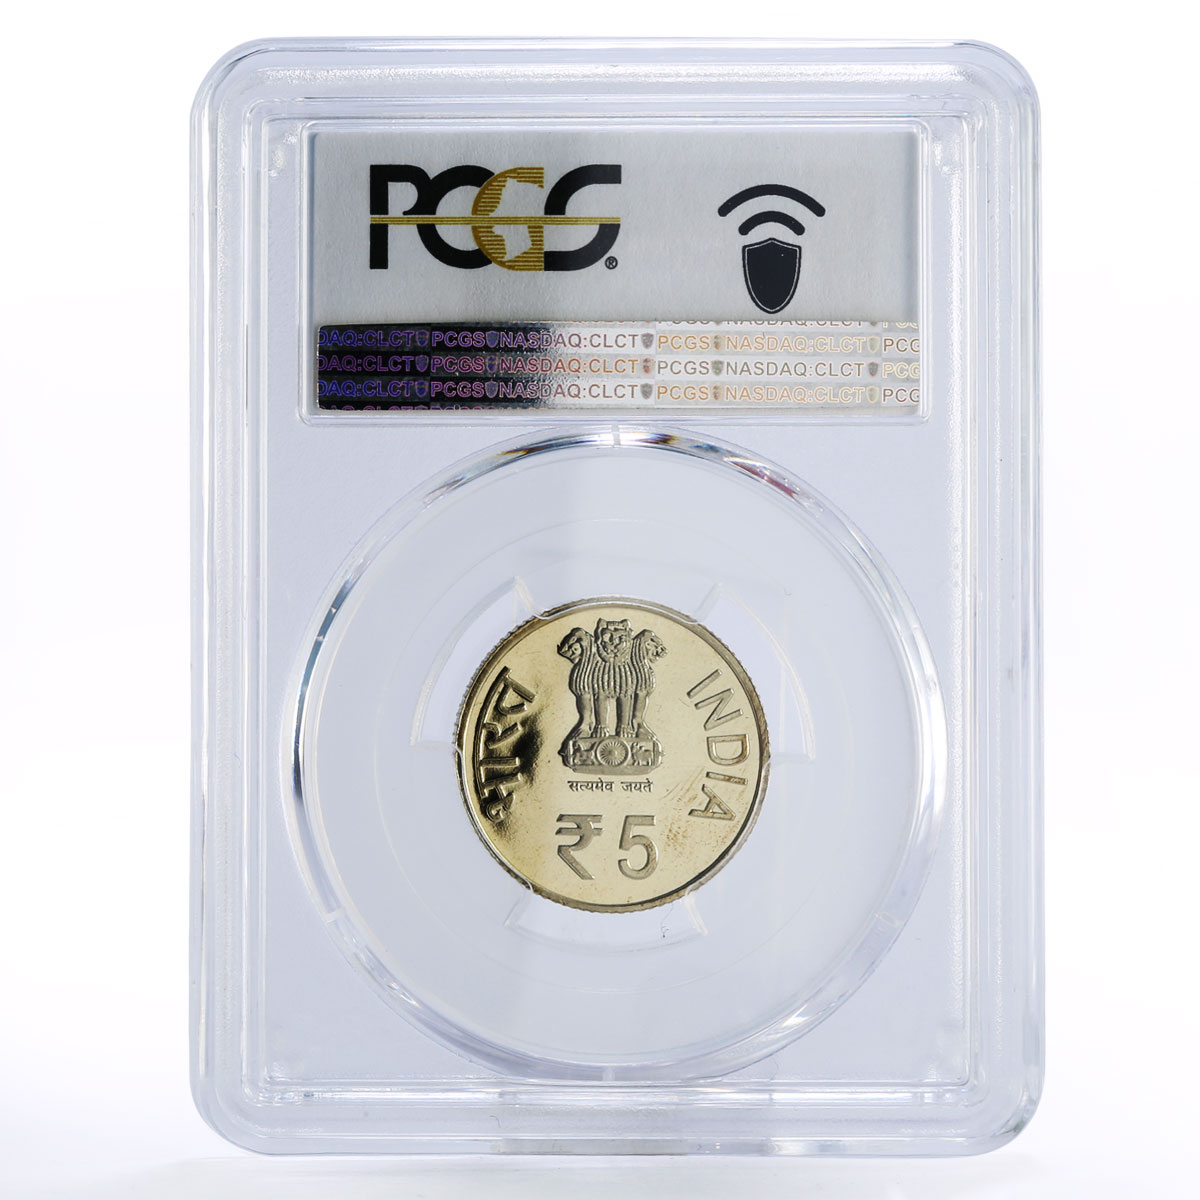 India 5 rupees 150th Anniversary of Kuka Movement PL67 PCGS NiBrass coin 2007